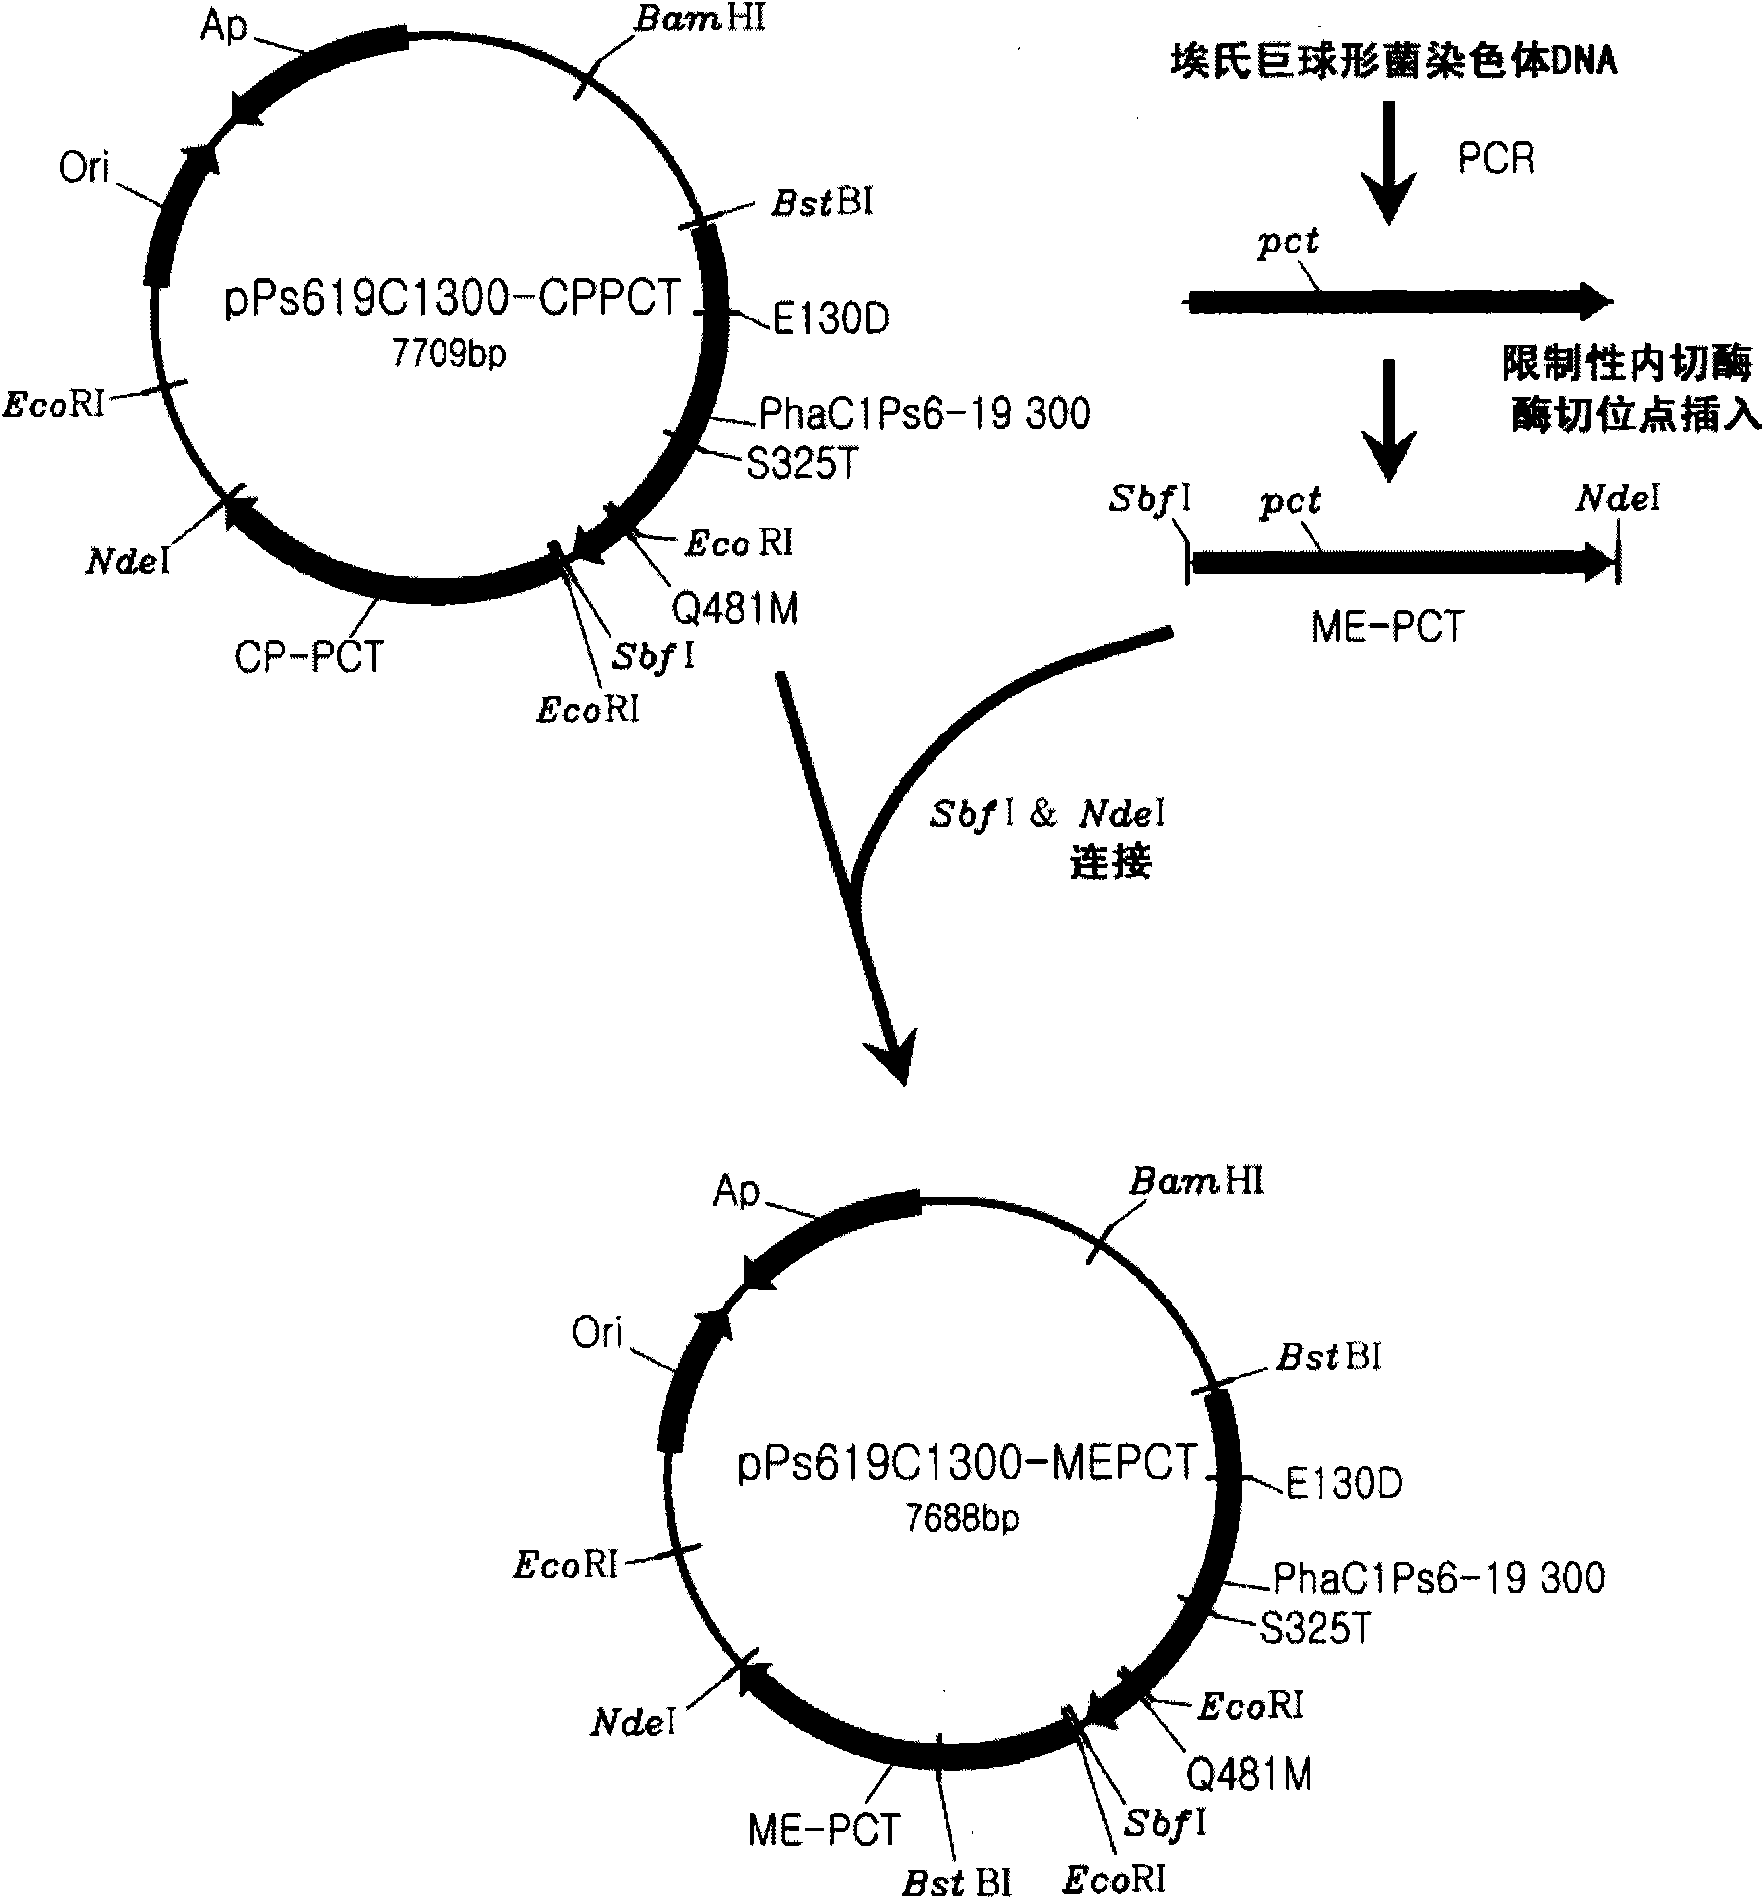 Recombinant microorganism having a producing ability of polylactate or its copolymers and method for preparing polylactate or its copolymers using the same